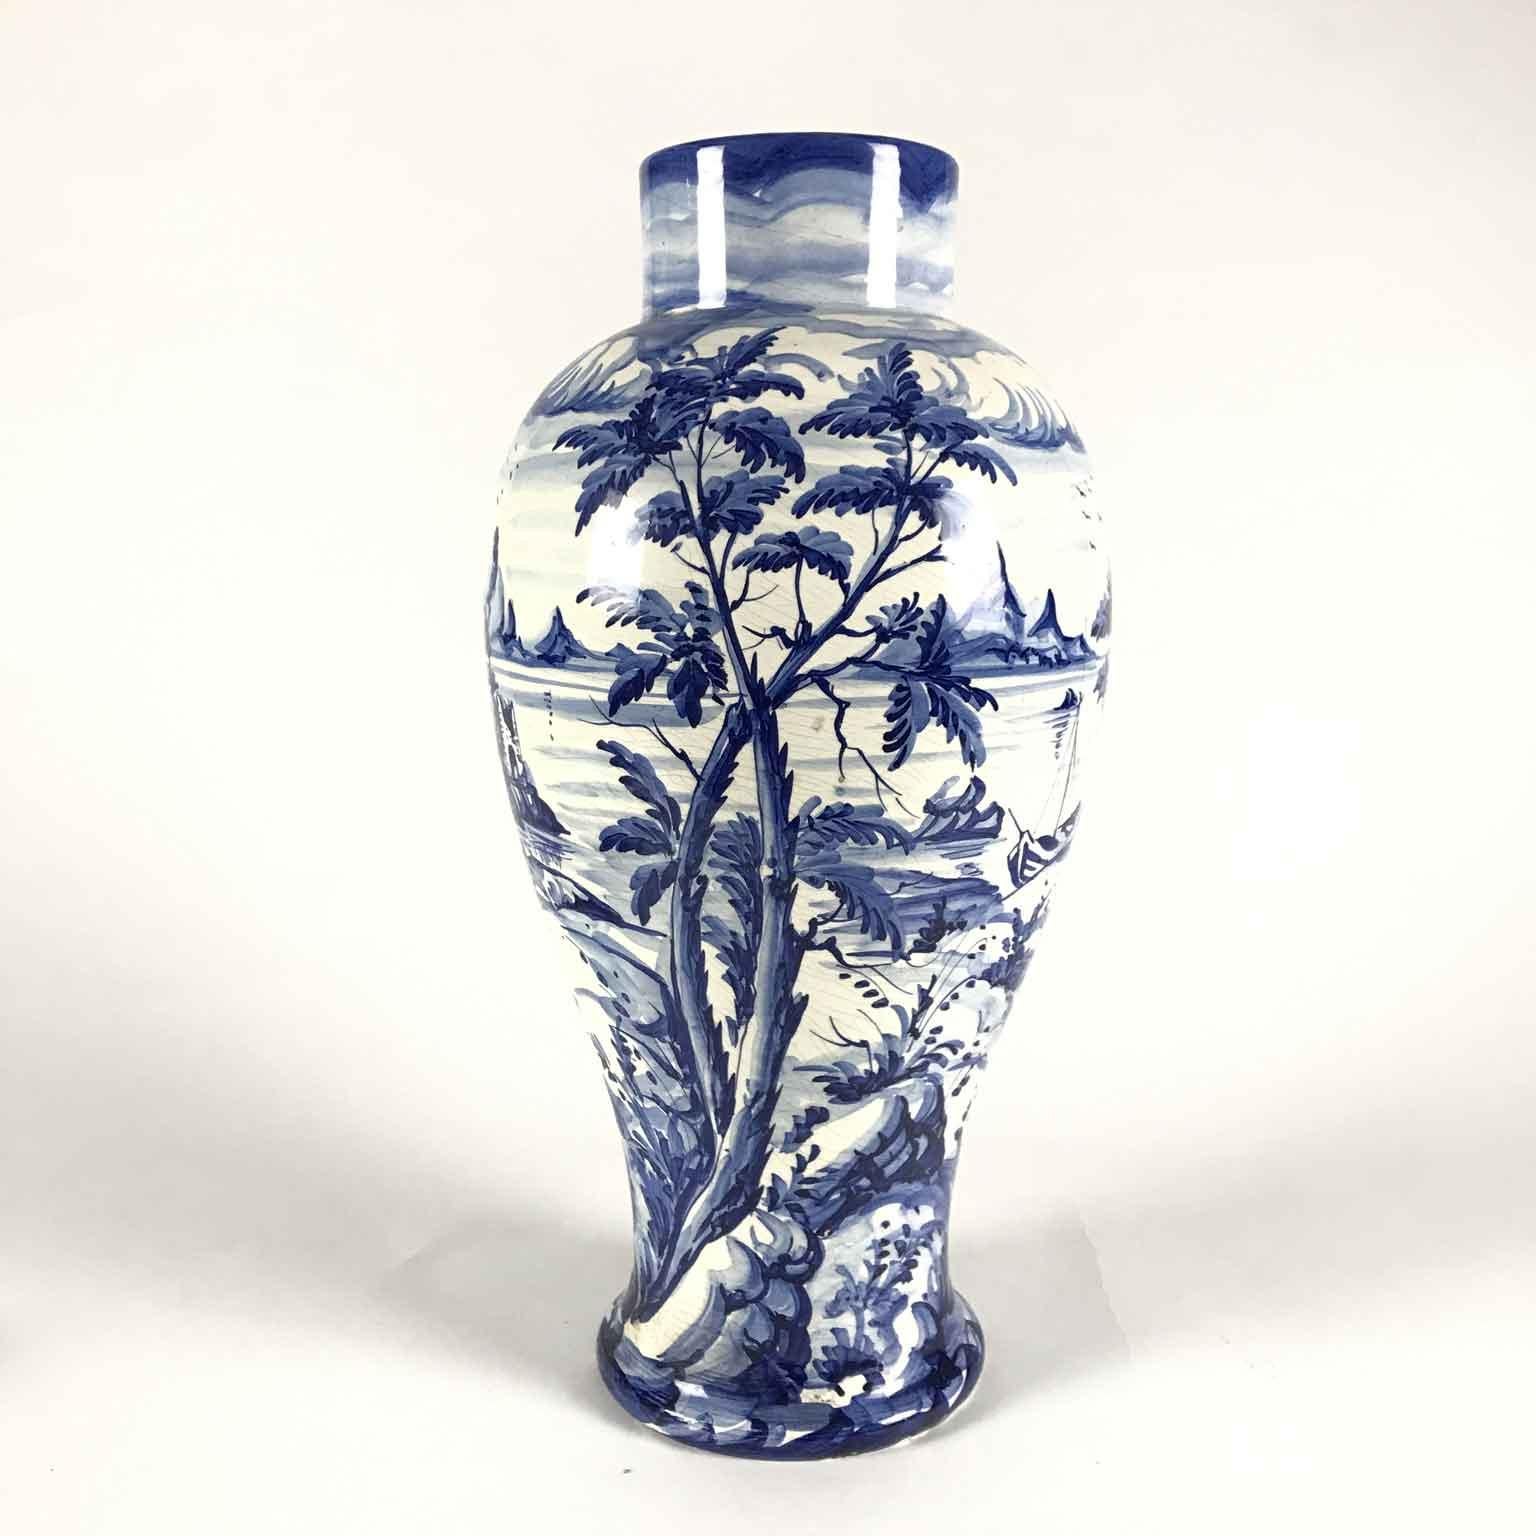 Italian and specifically Florentine vase in White and Blue Ceramic made by the Taccini Family Vinci 1976, as written on the bottom,  decorated in the round with a lake landscape, with trees in the foreground, boats and mountains in the background.